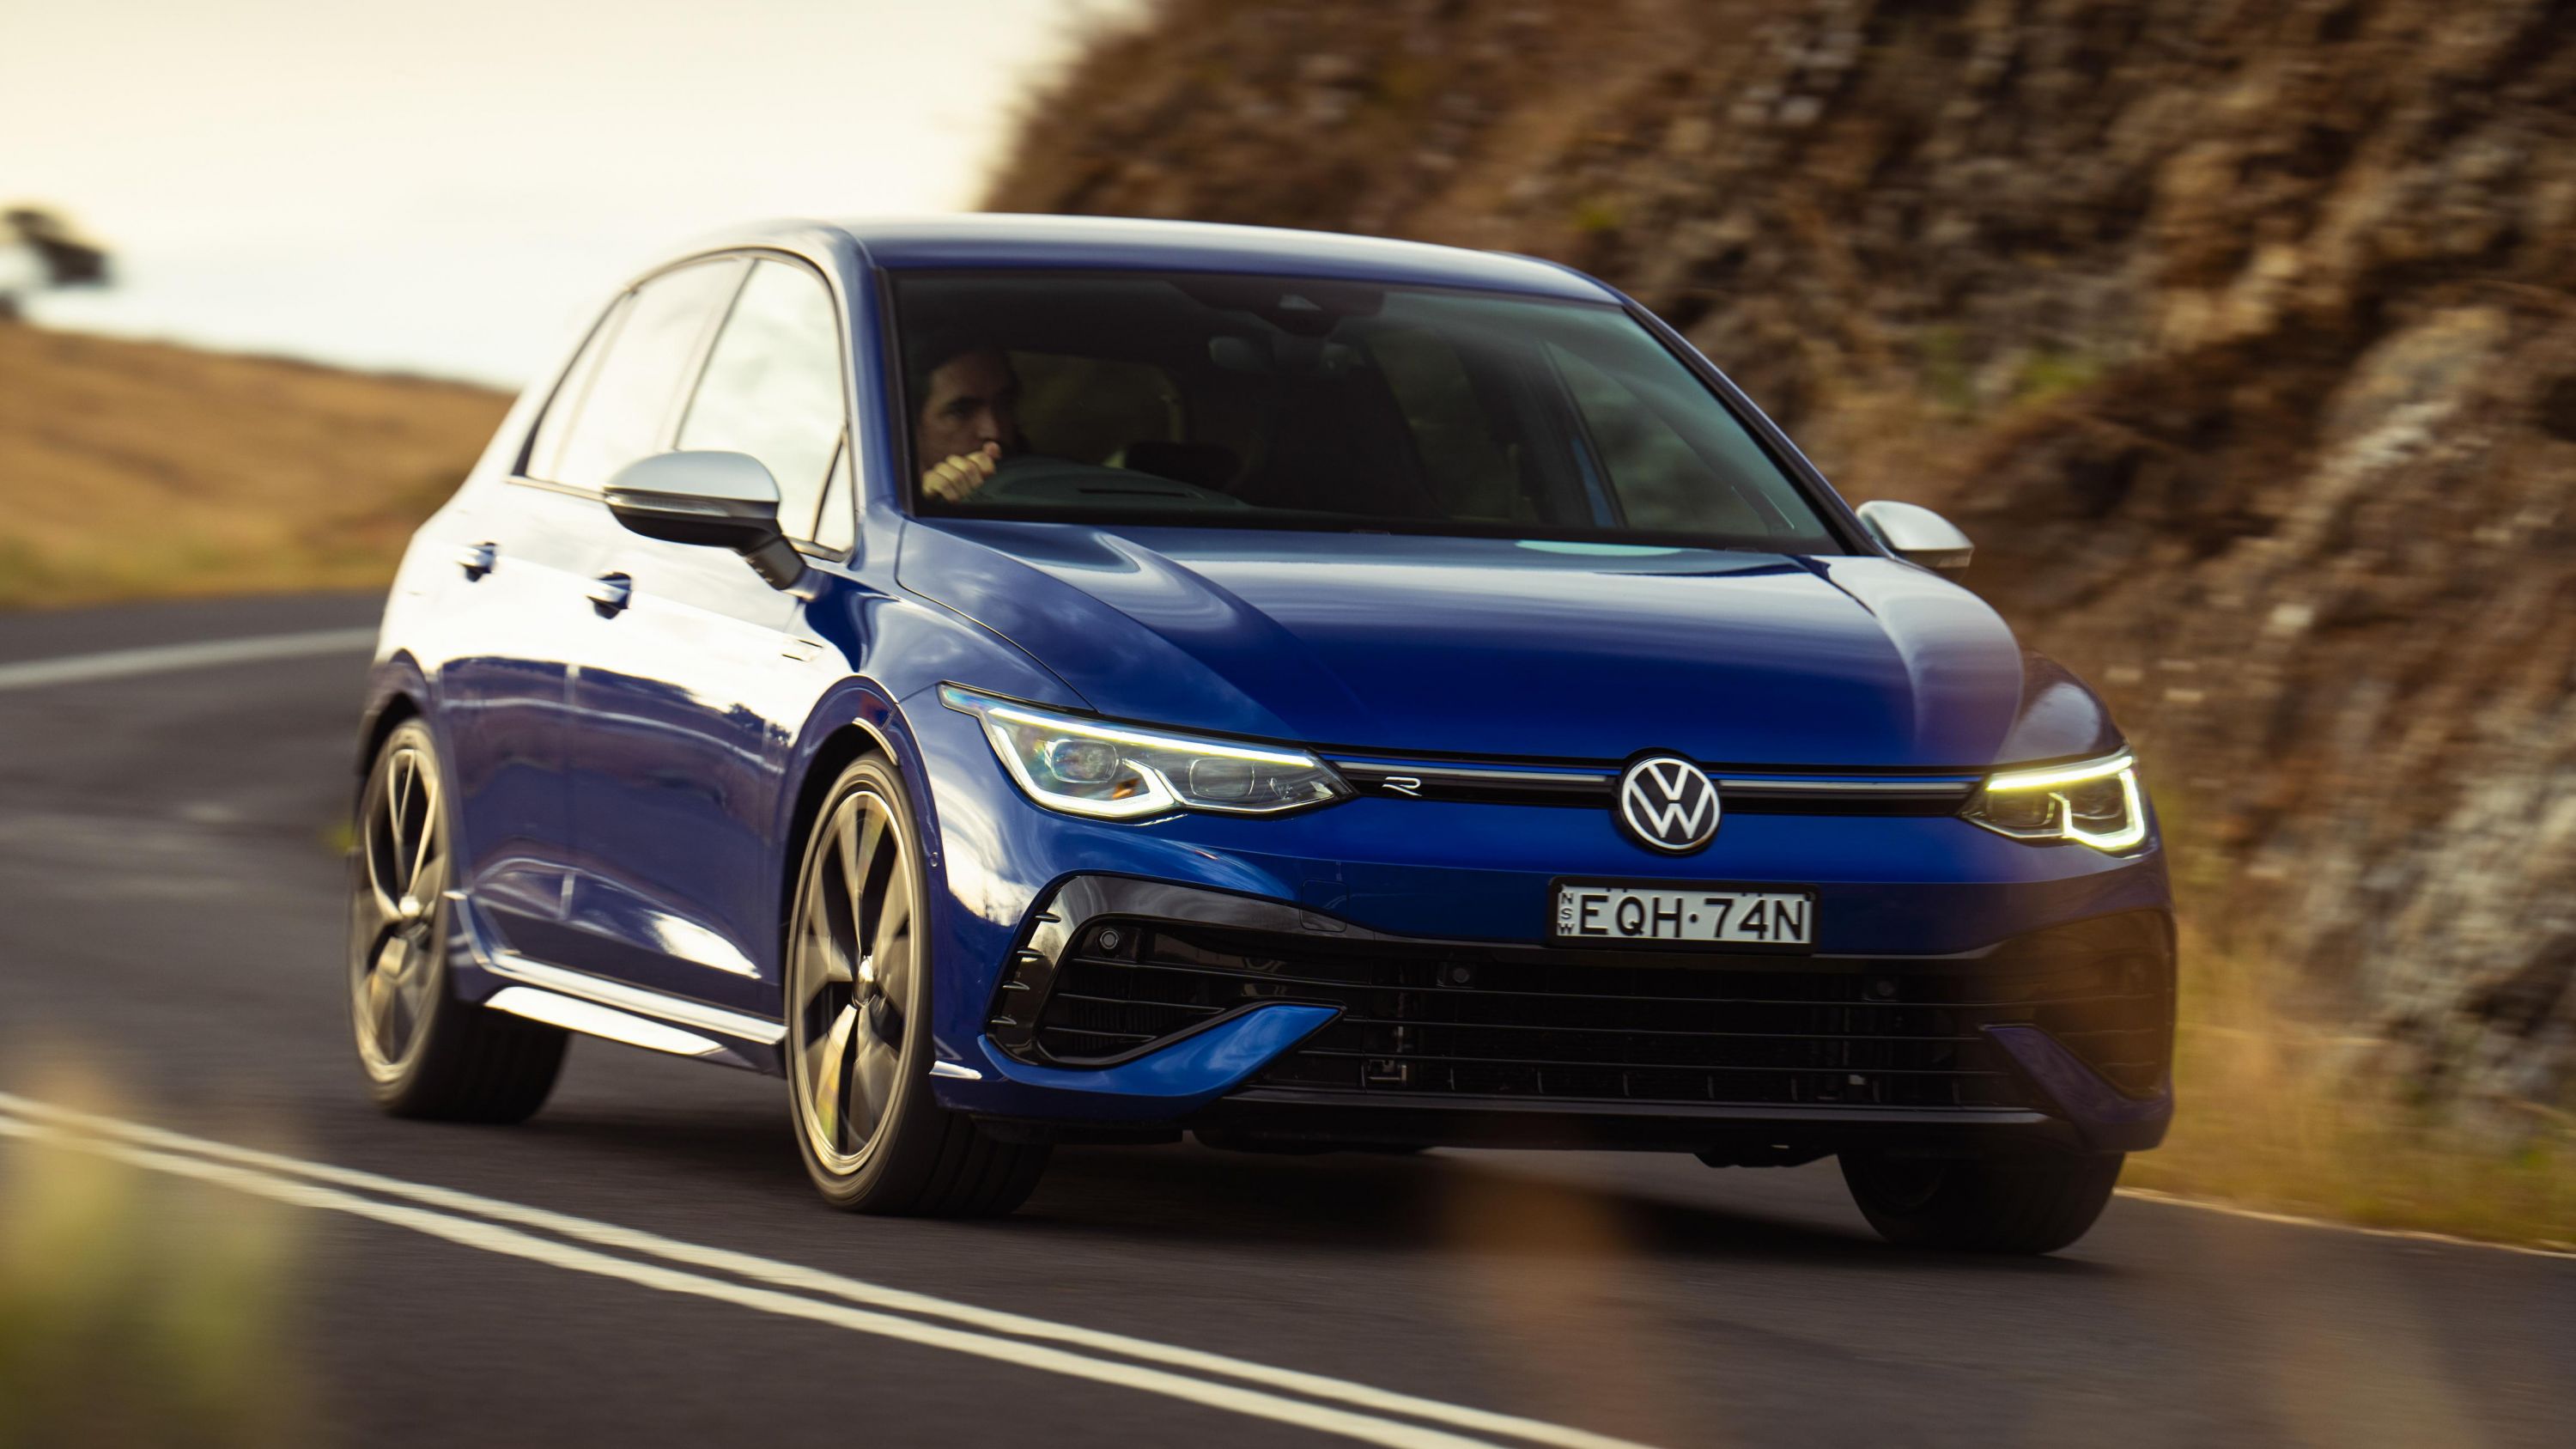 2022 Volkswagen Golf R Revealed As The Most Powerful Golf Ever